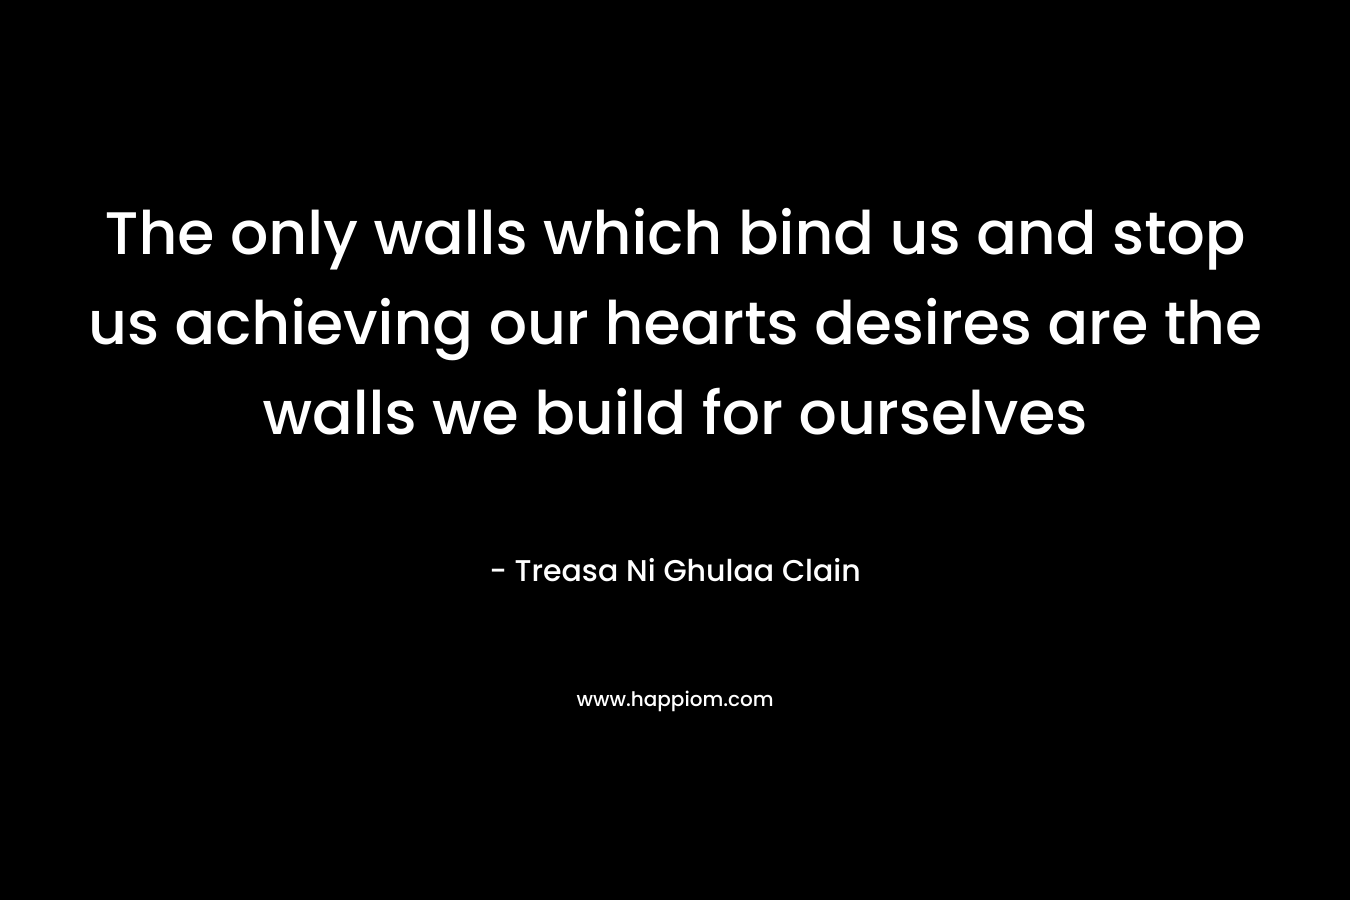 The only walls which bind us and stop us achieving our hearts desires are the walls we build for ourselves